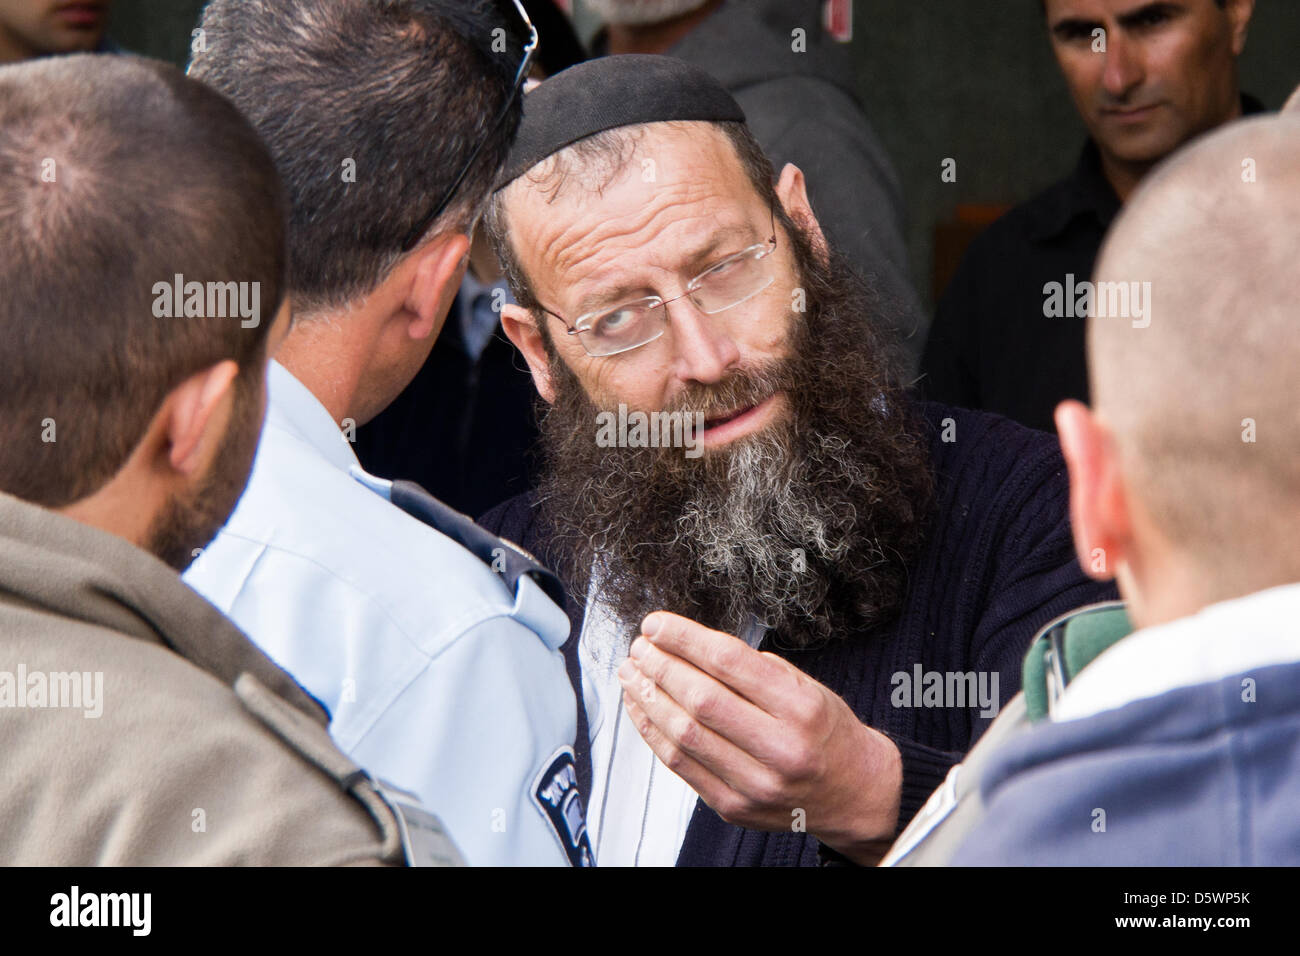 Jerusalem, Israel. 9-Apr-2013. Jewish right-wing activists, lead by Baruch Marzel (C), disrupt a commemoration procession through the historical village of Deir Yassin, organized by Zochrot (Remembering), seeking to raise public awareness of the Palestinian Nakba (Catastrophe).     Deir Yassin, a pre-1948 Arab village adjacent to Jerusalem with a population of about 600, was invaded by paramilitaries from the Jewish Irgun and Lehi groups on April 9, 1948 and around 115 villagers were massacred. Credit: Nir Alon/Alamy Live News Stock Photo